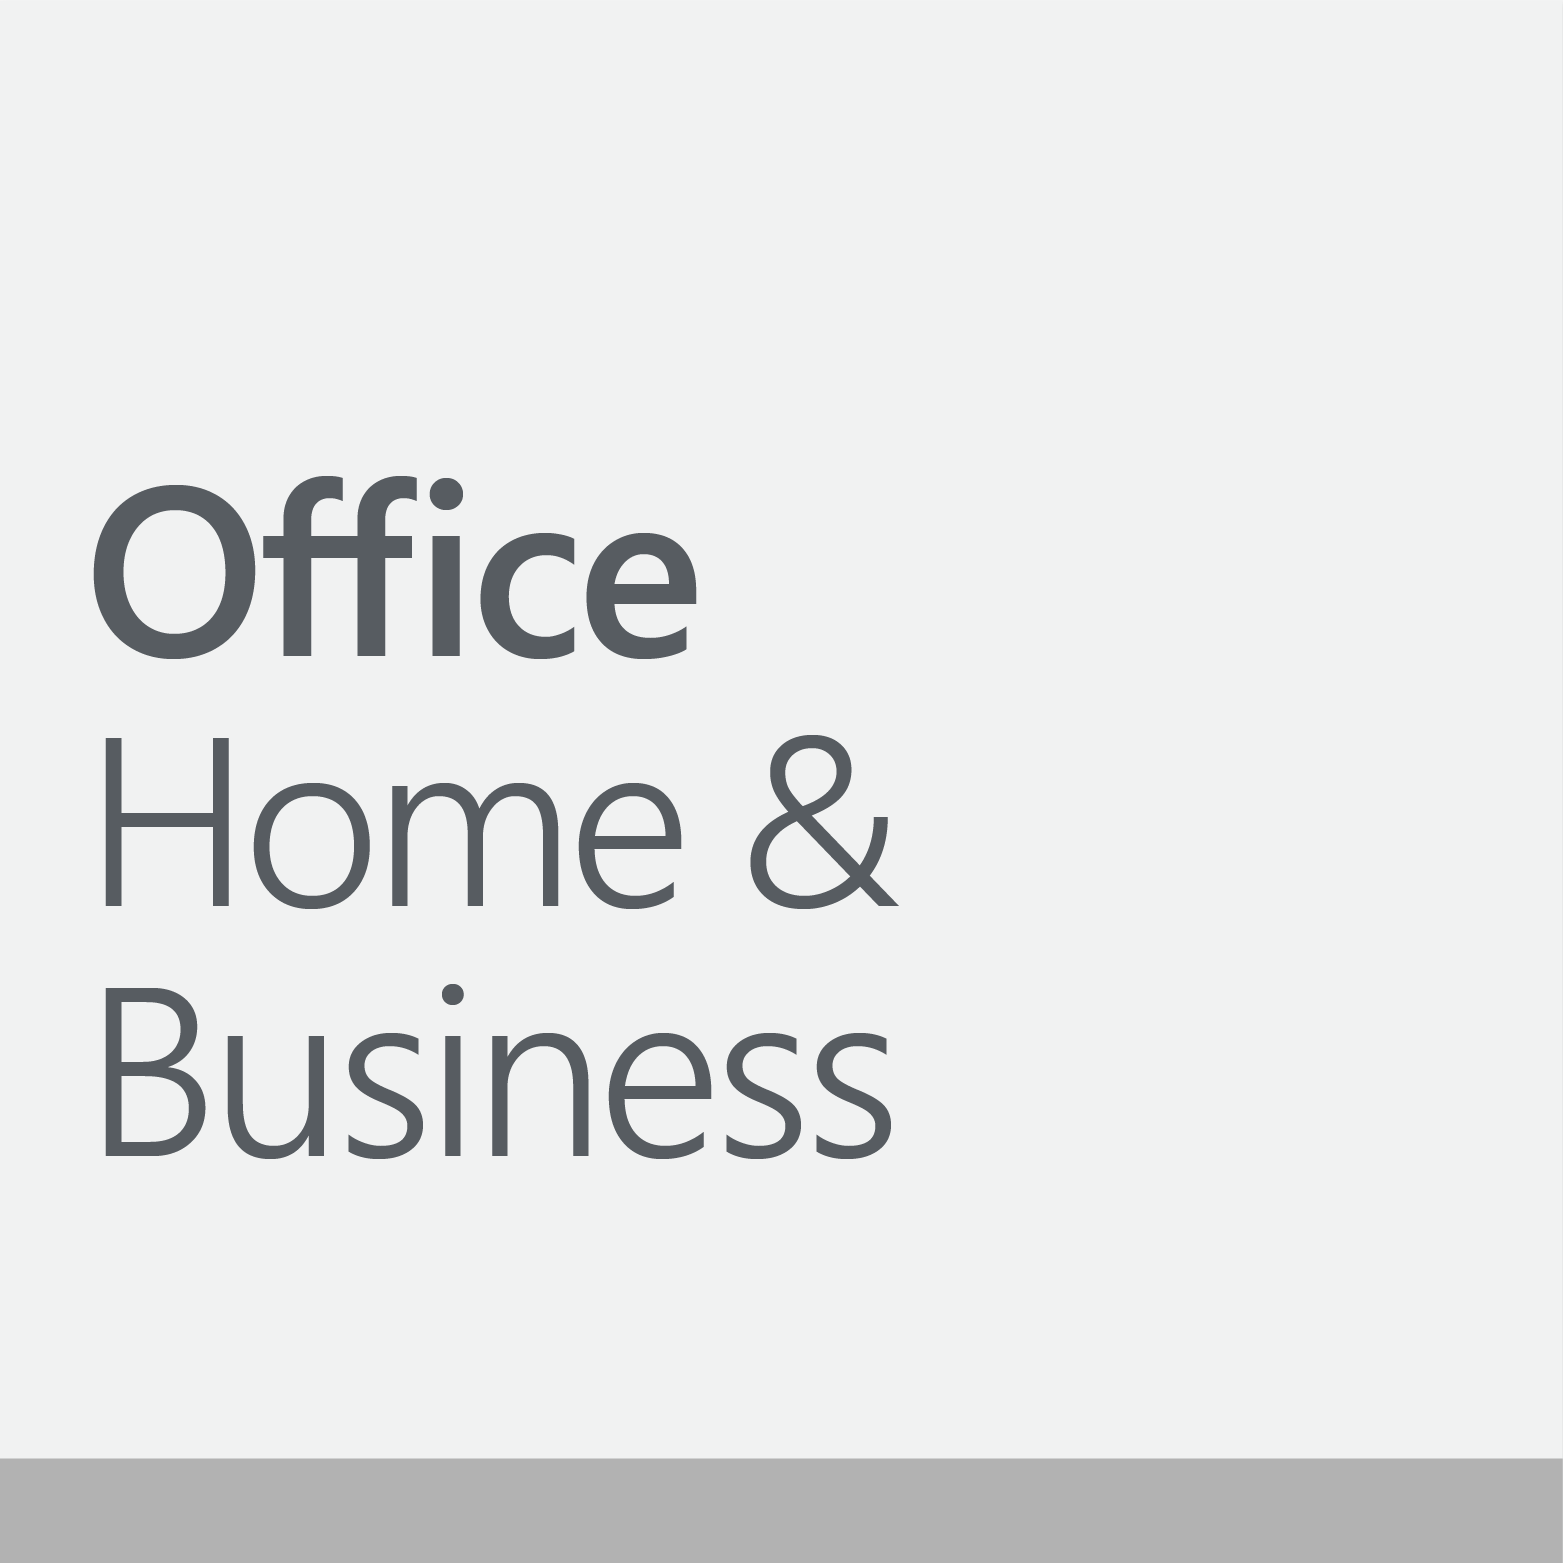 Office Home ＆ Business 2019 Microsoft　BTO パソコン　格安通販